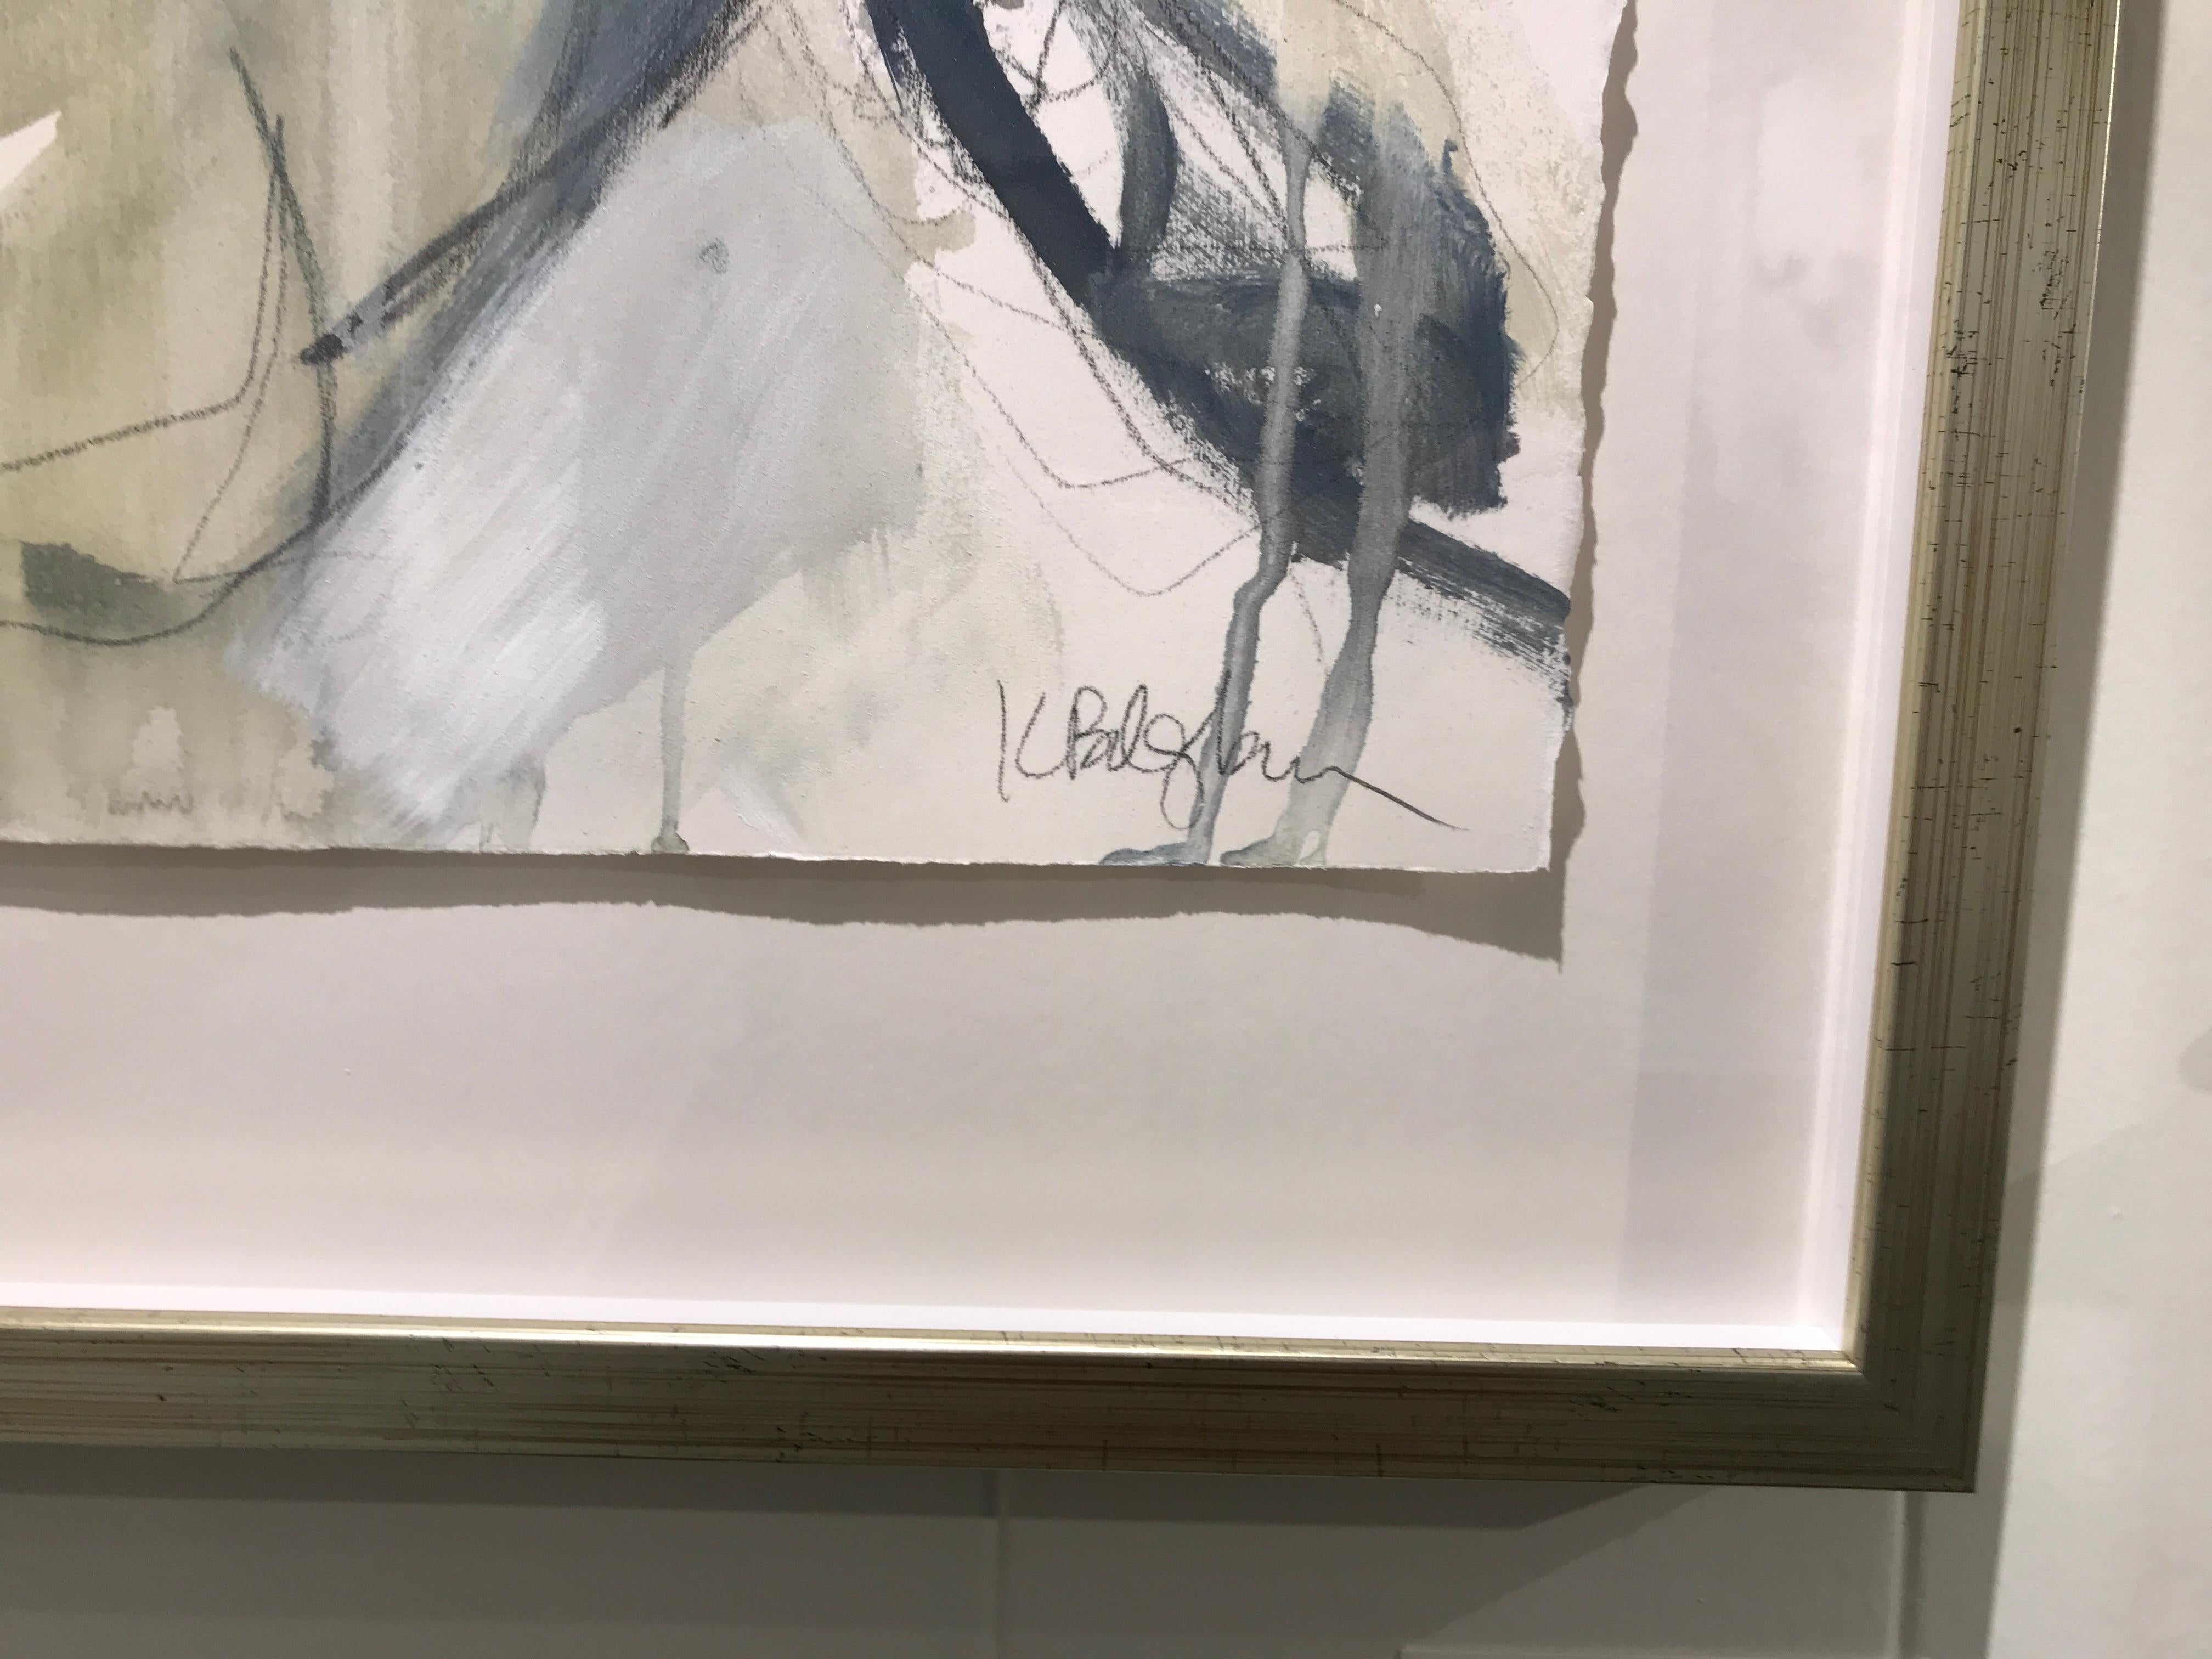 'Presence' is a medium size framed abstract mixed media on paper nude painting created by American artist Kelley Ogburn in 2018. Featuring a palette made of black, grey, pink and ochre tones, this painting draws our attention with its bold and